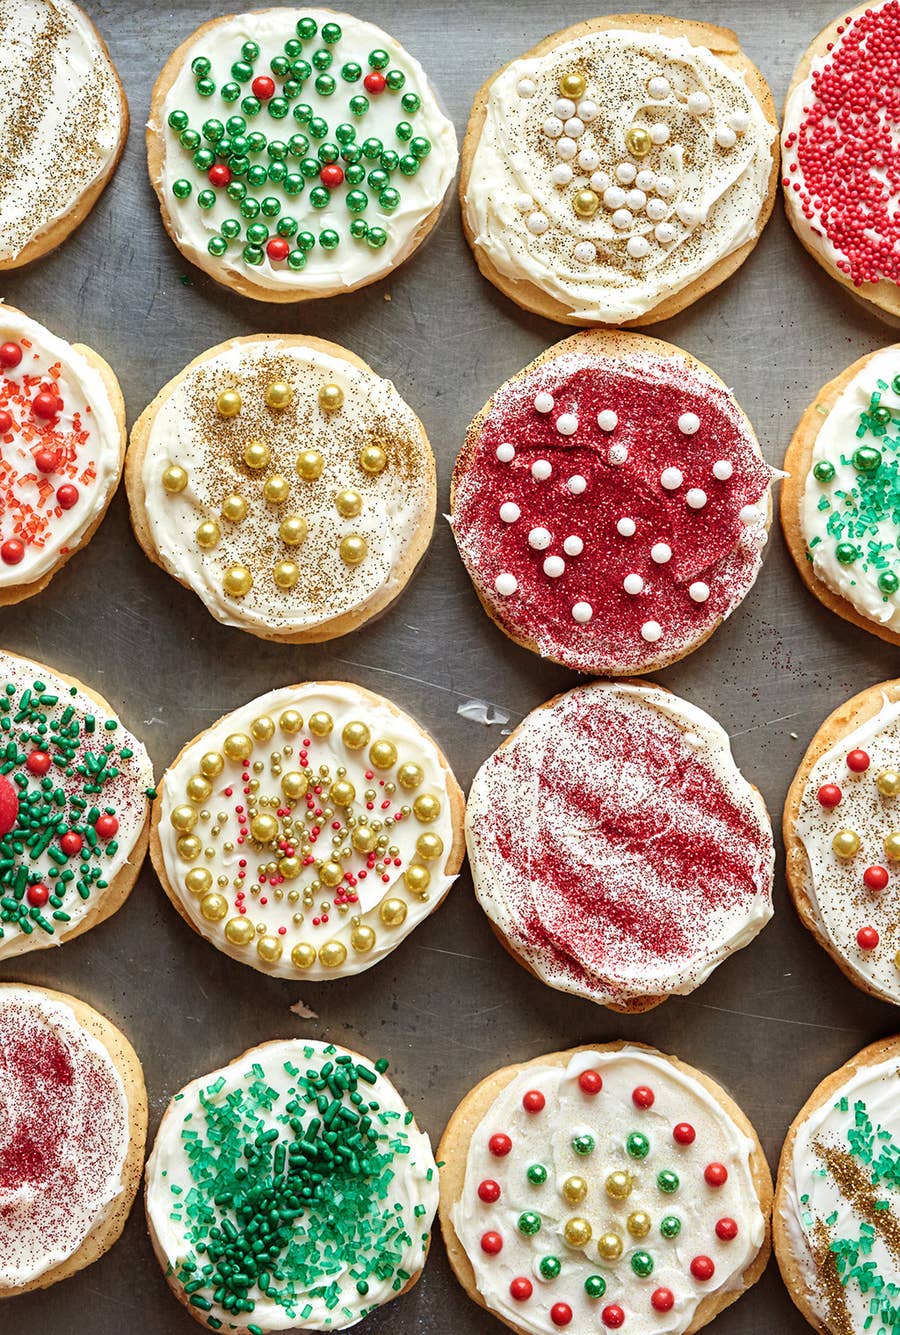 I've been baking for years—and this is my secret to perfect cookies